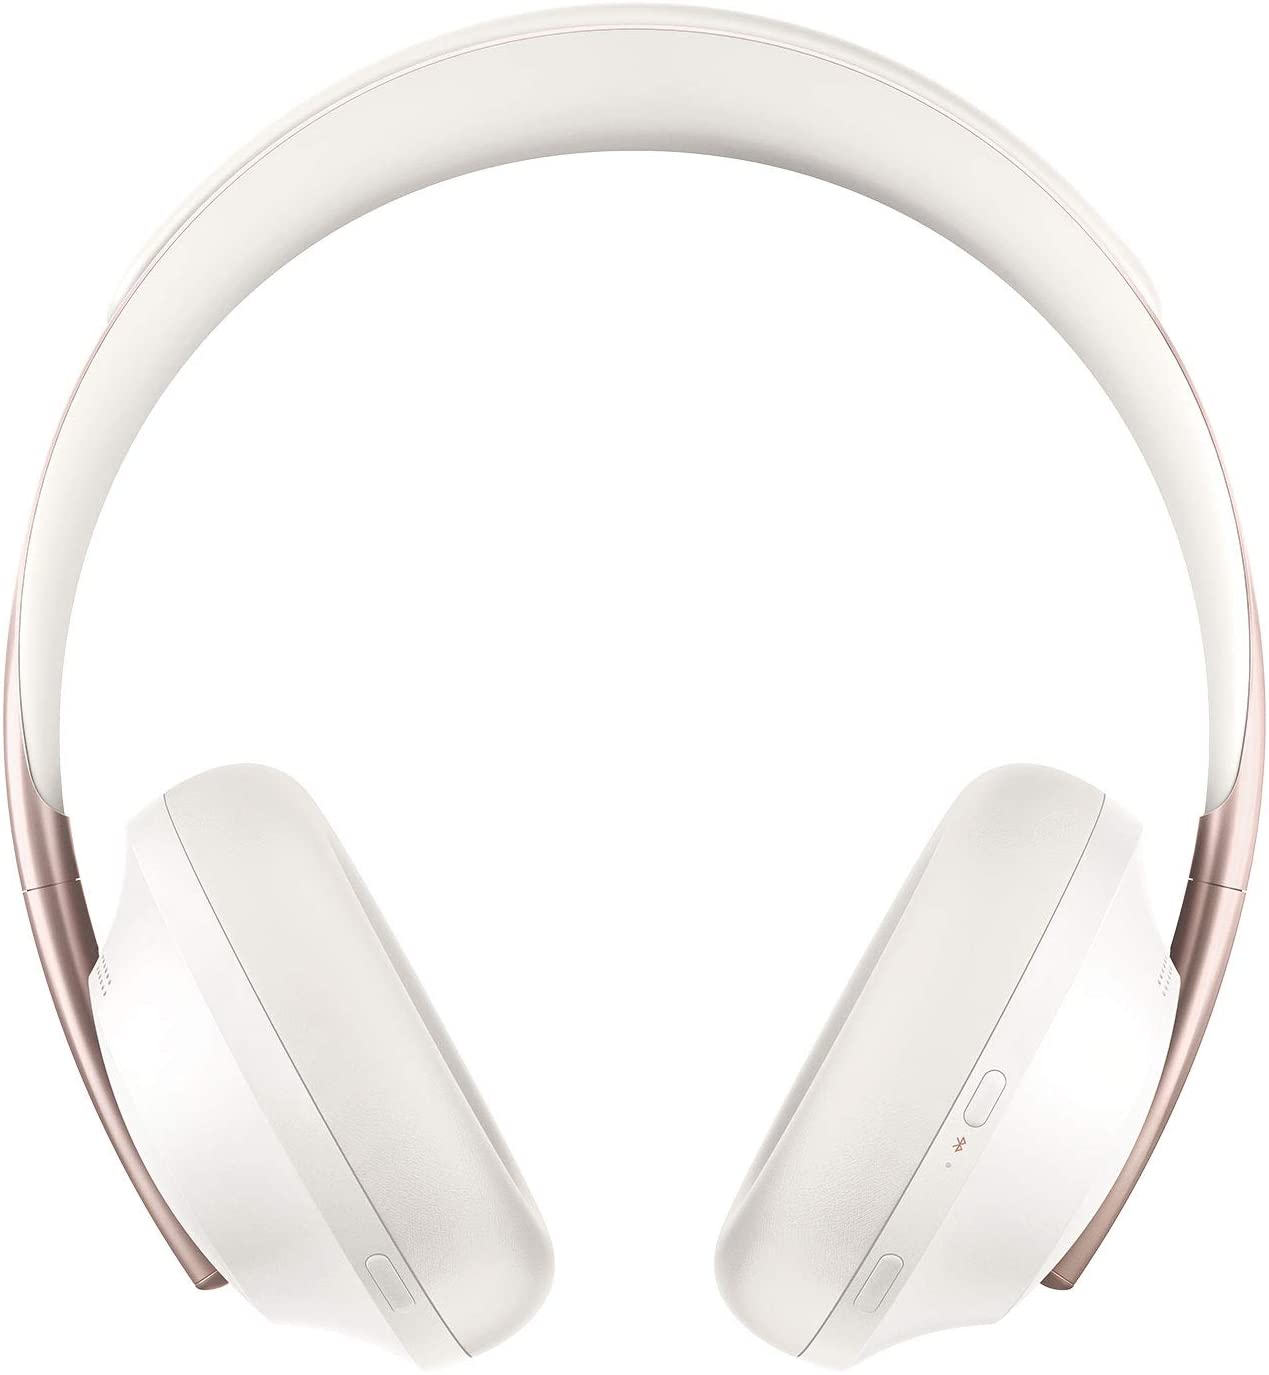 Bose Noise Cancelling Wireless Bluetooth Headphones 700 On Sale for $80 Off [Deal]